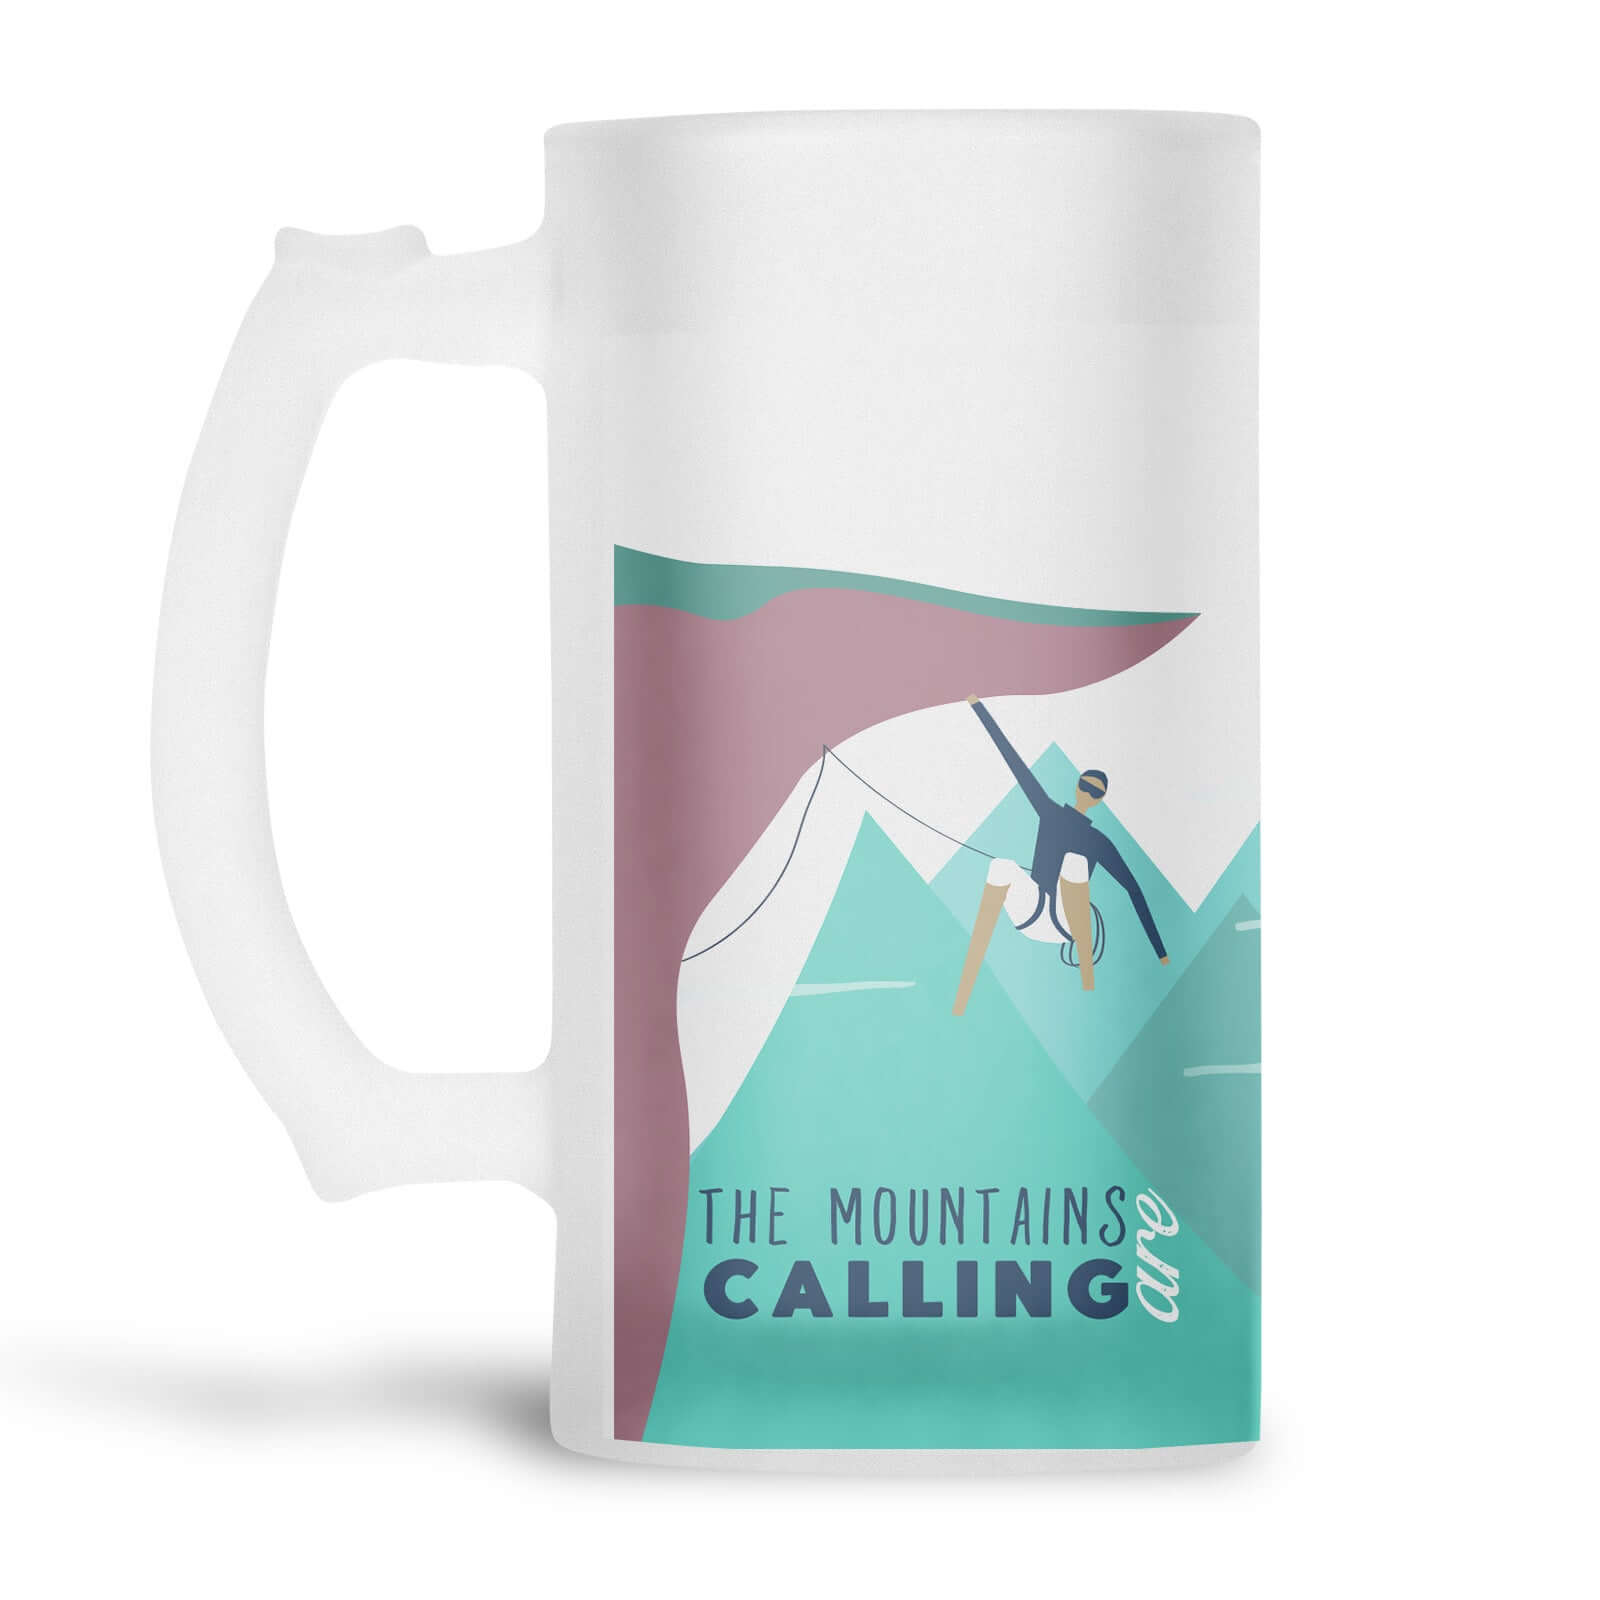 Rock climbing with The mountains are calling slogan printed onto a frosted glass beer stein from Mustard and Gray